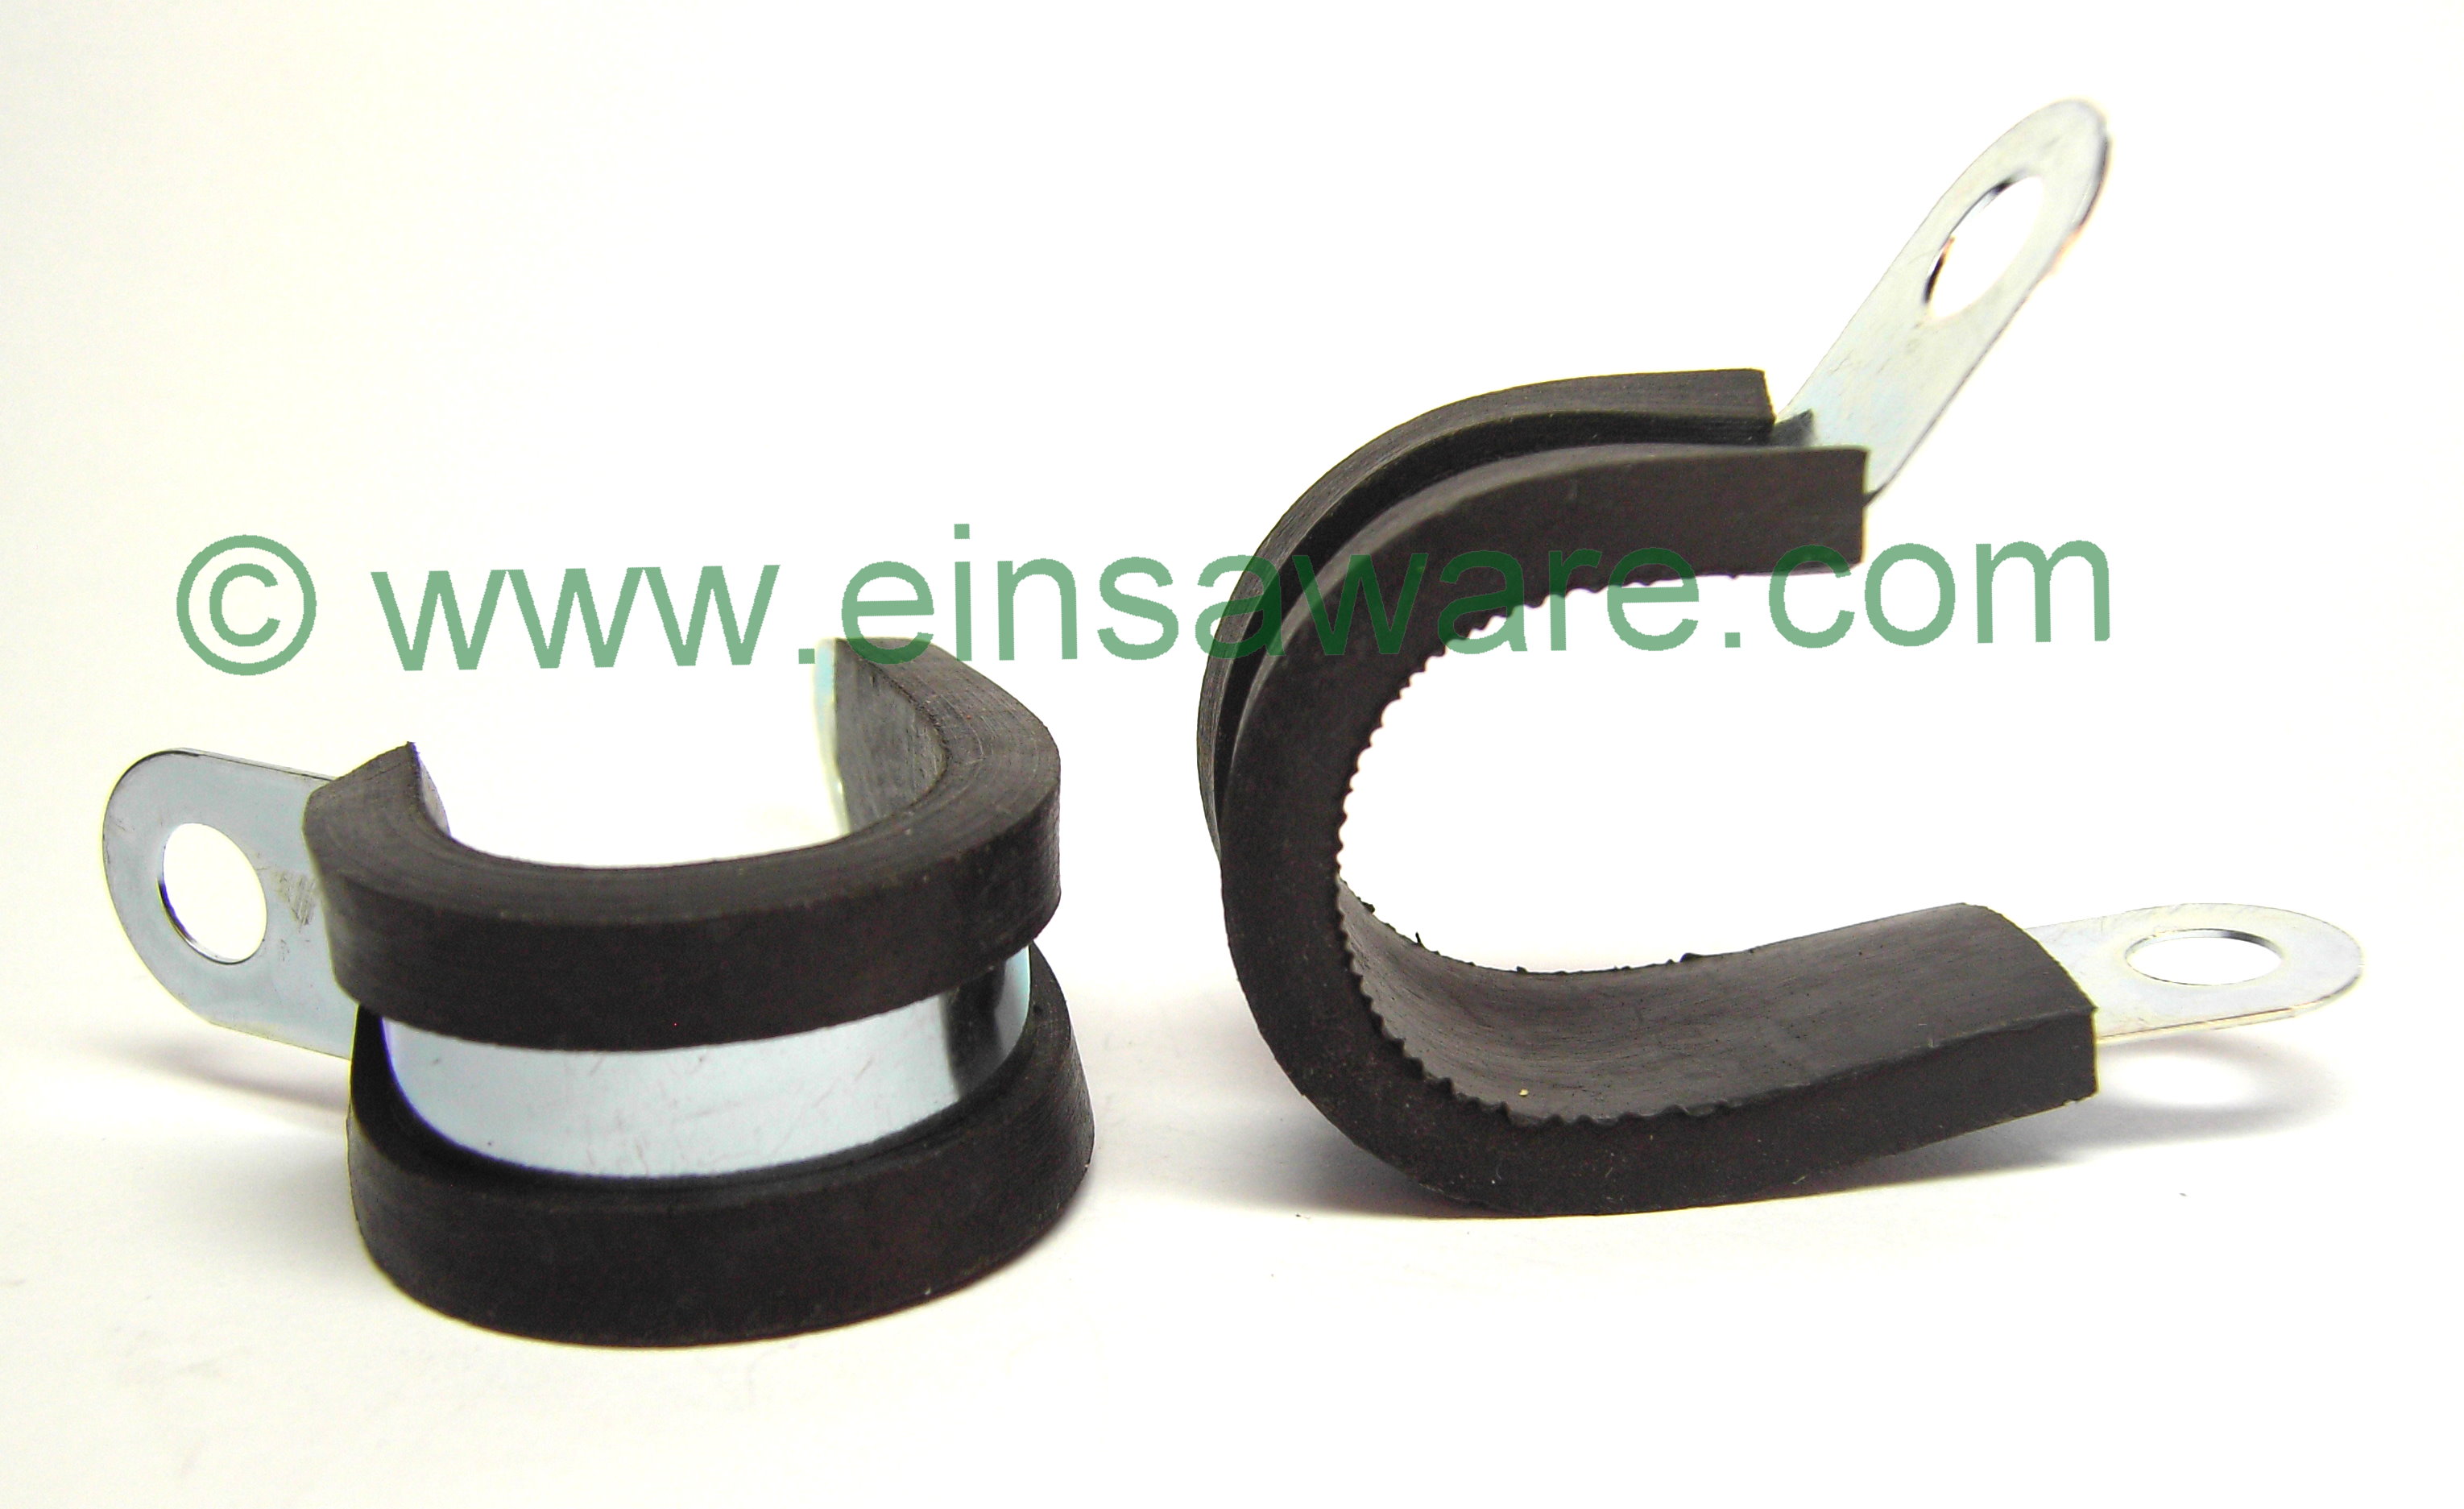 Cable Clamps Steel with Neoprene Layer